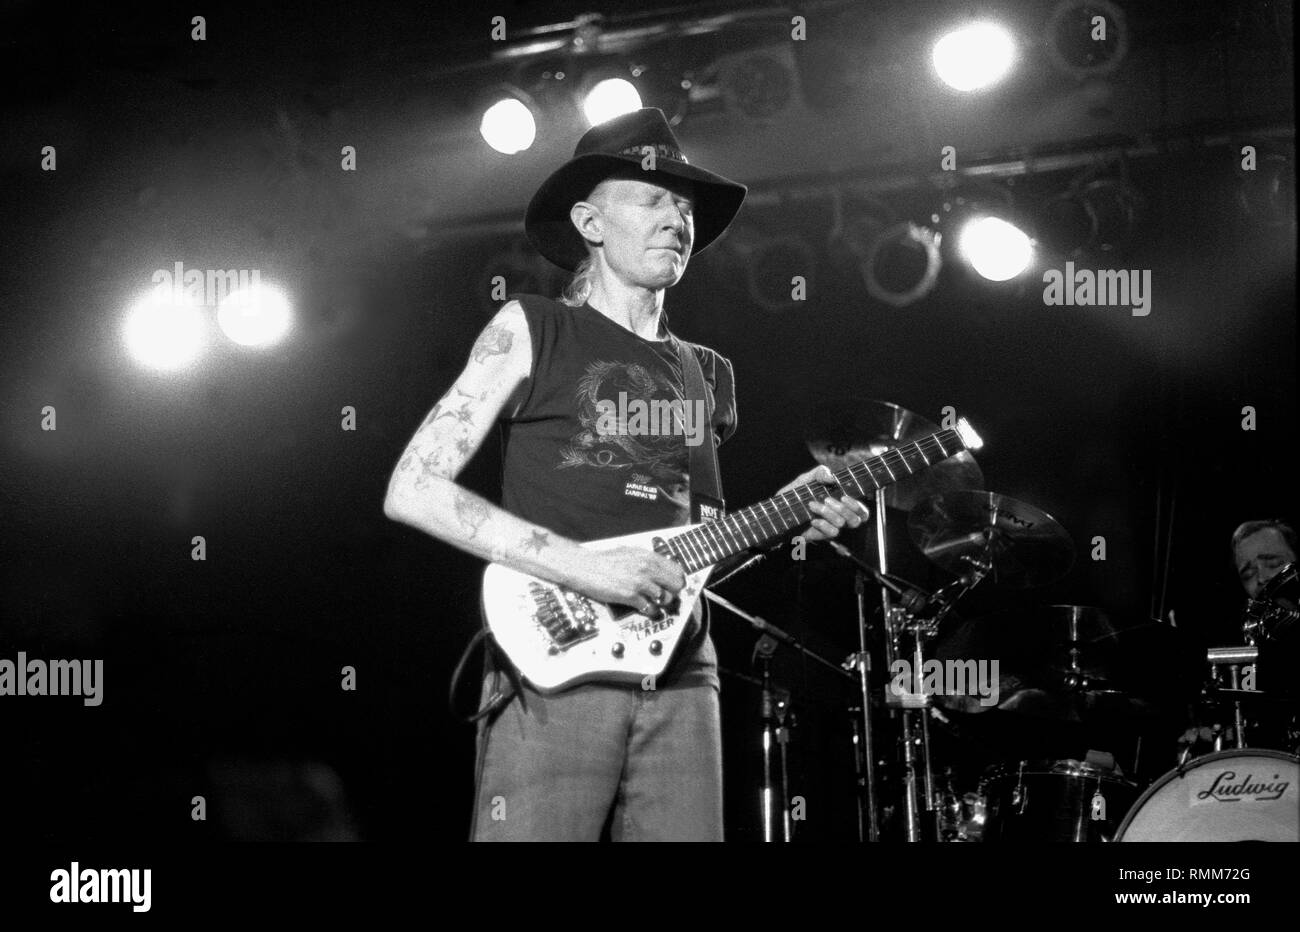 Blues guitarist, singer and producer Johnny Winter III is shown performing on stage during a 'live' concert appearance. Stock Photo